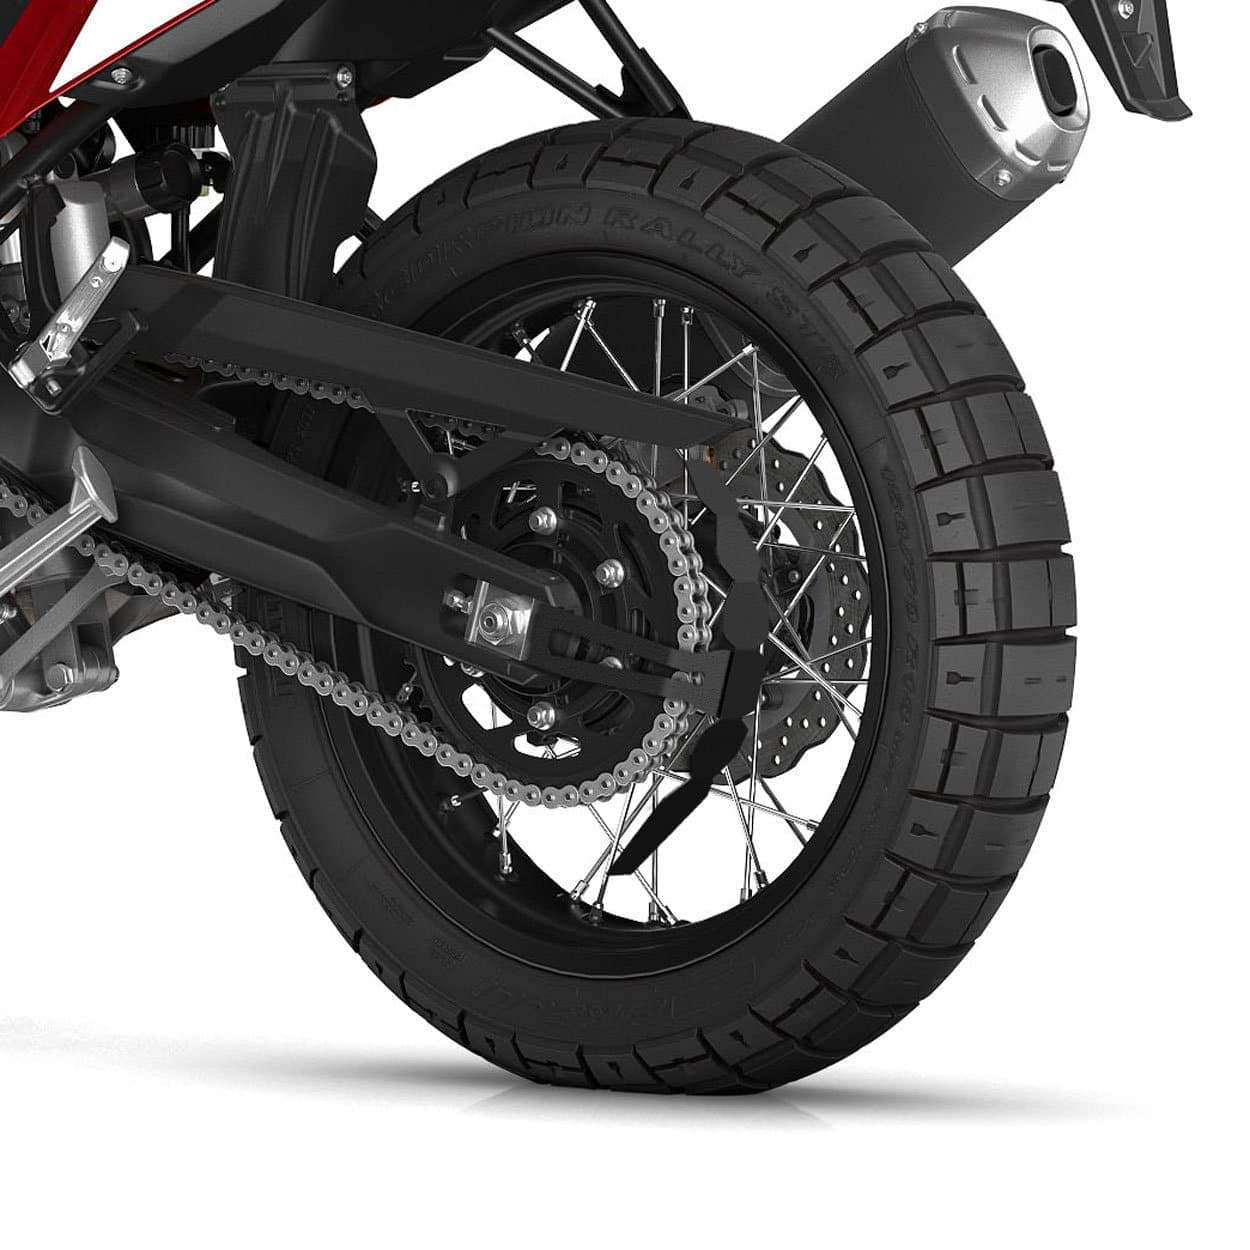 Pyramid Chain Quadrant | Matte Black | Yamaha Tenere 700 2019>Current-35277-Chain Guards-Pyramid Motorcycle Accessories